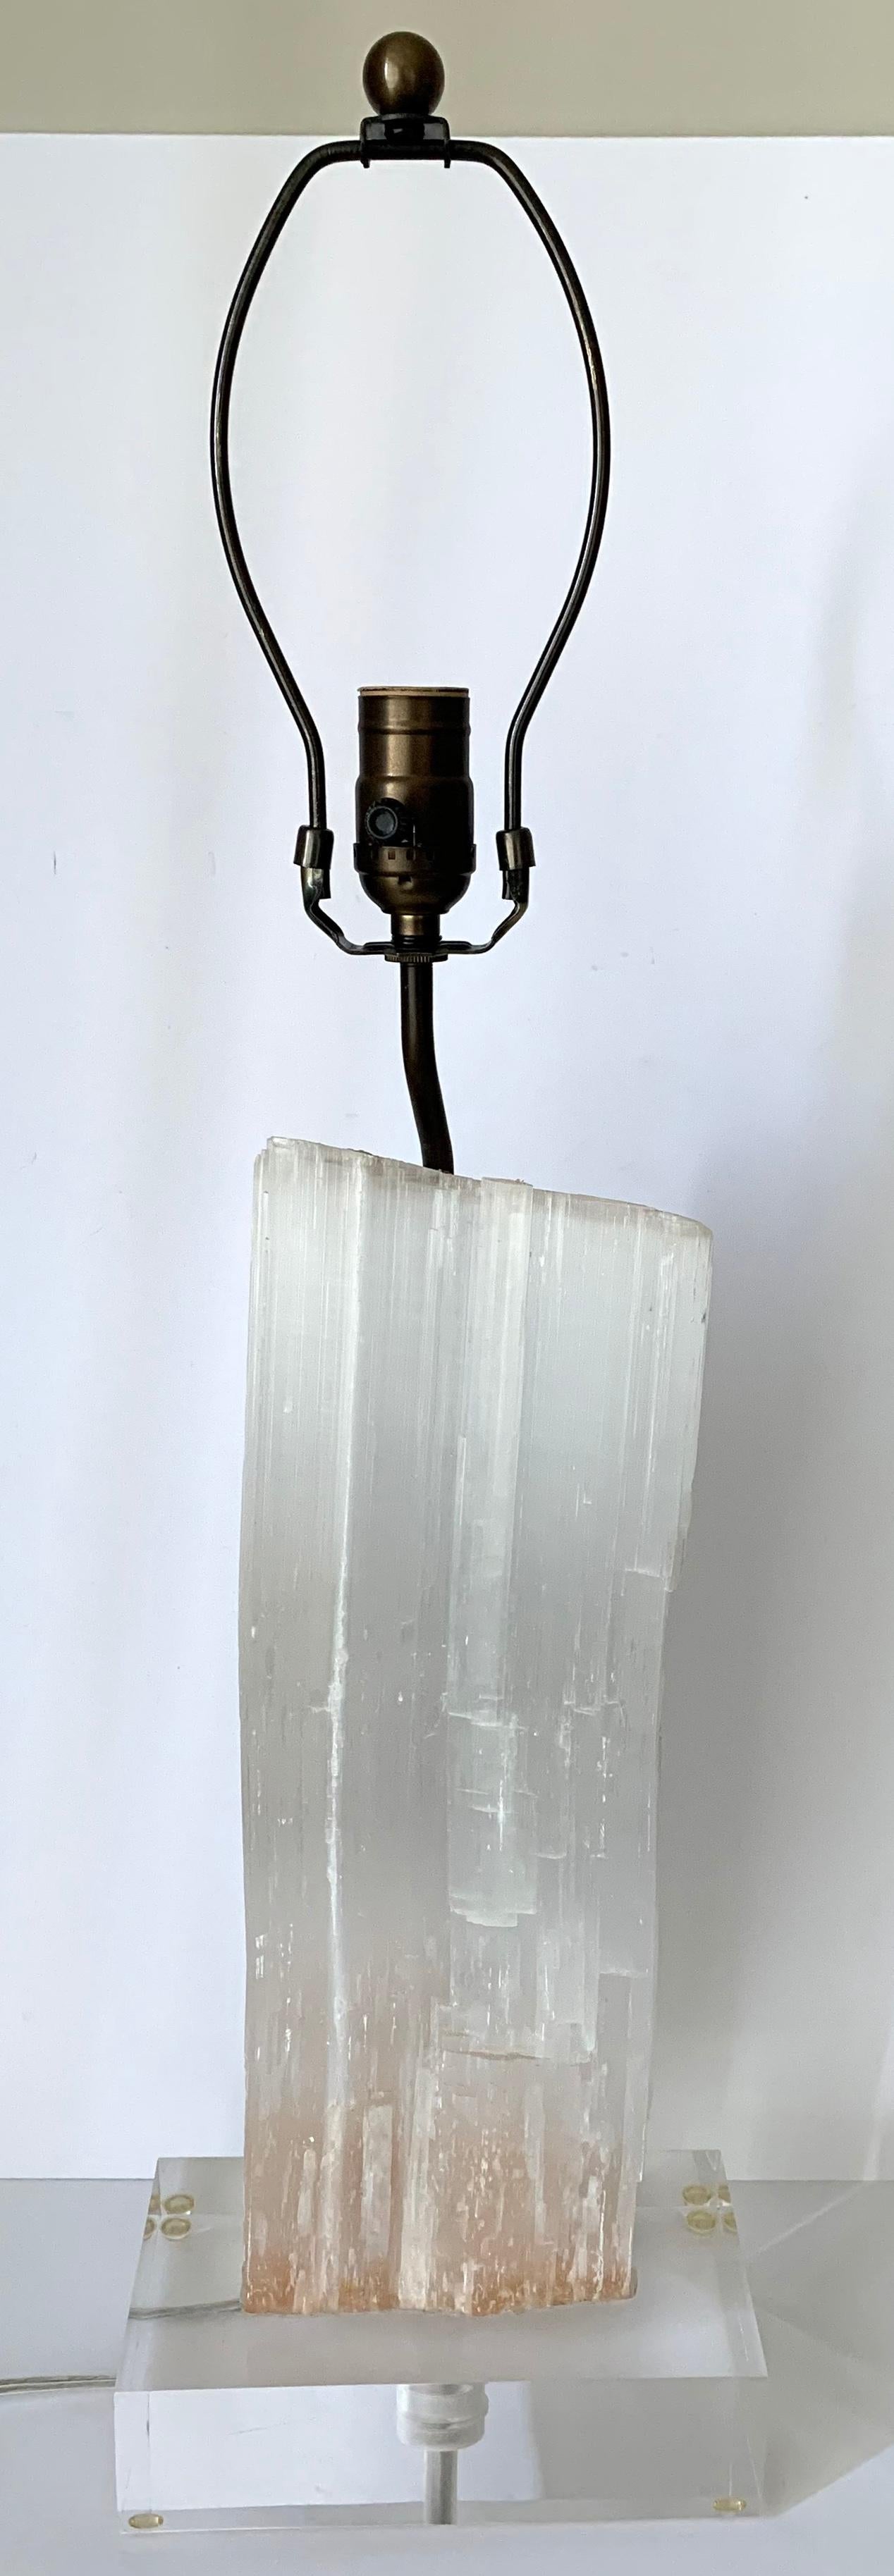 Pair of selenite lamps on thick clear Lucite bases. Selenite has naturally occurring variances in color and has a very subtle pink hue in certain light. Adjustable single sockets extend up to 24